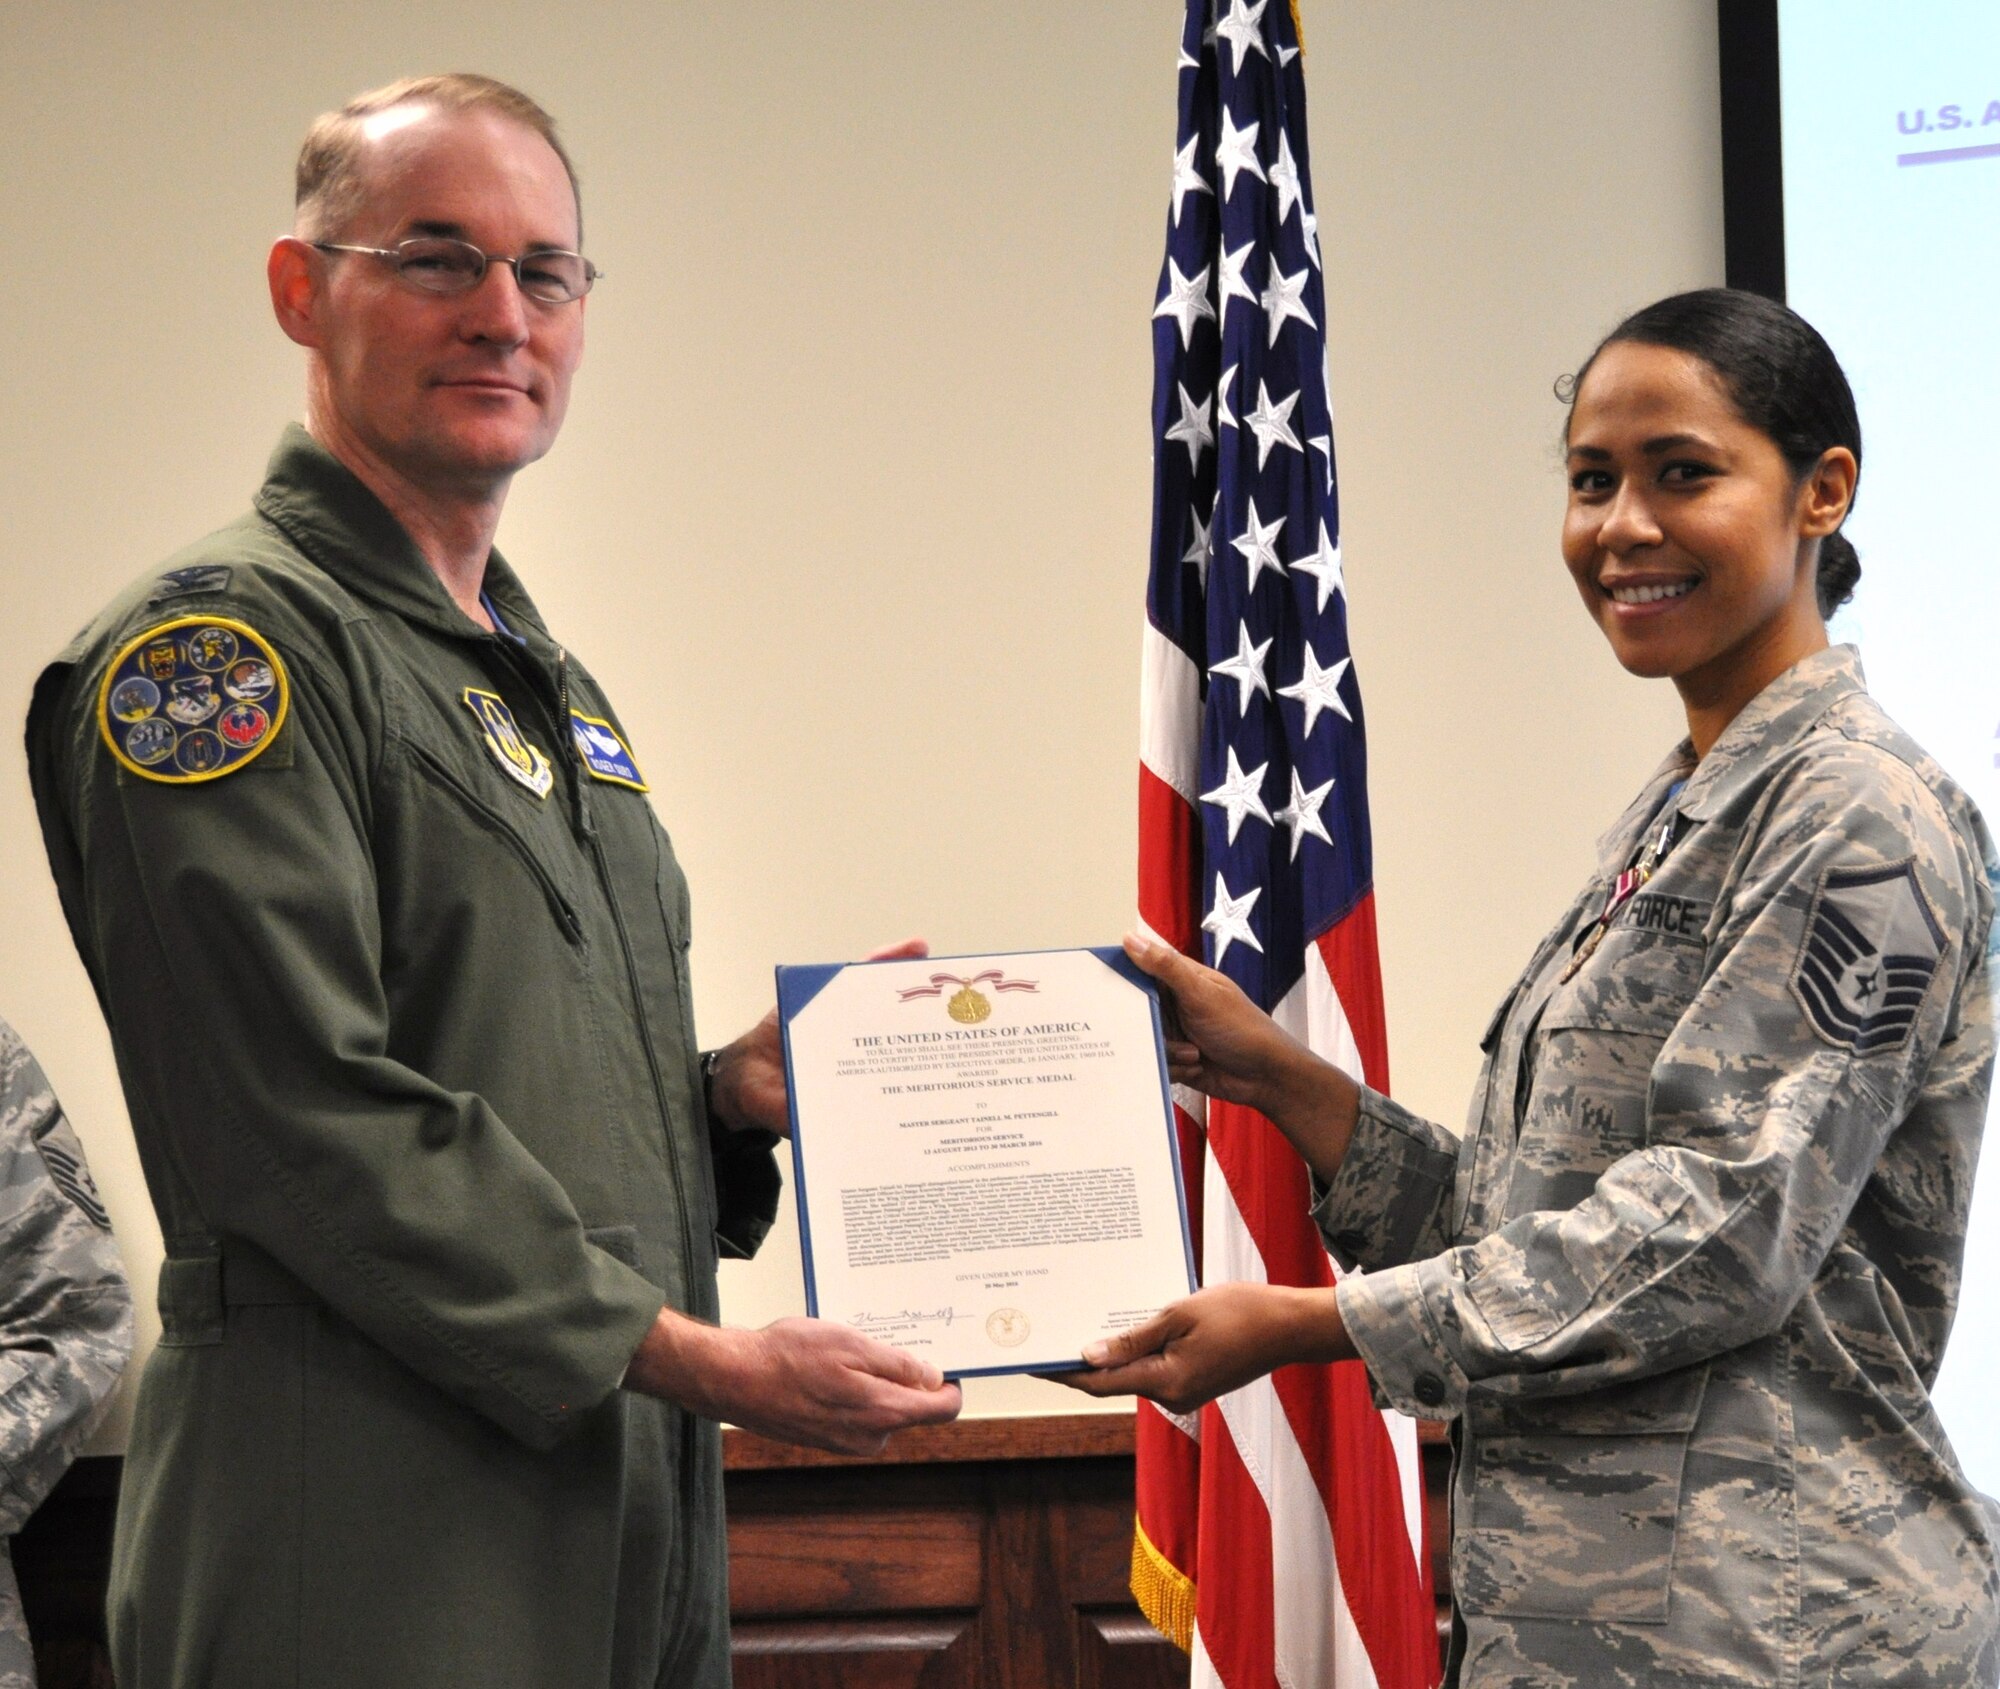 Col. Roger Suro, 340th FTG commander presents a Meritorious Service Medal to Master Sgt. Tainell Pettengill during  the Group's MUTA held Dec. 1-2 at Joint Base San Antonio-Randolph, Texas (Photo by Janis El Shabazz).